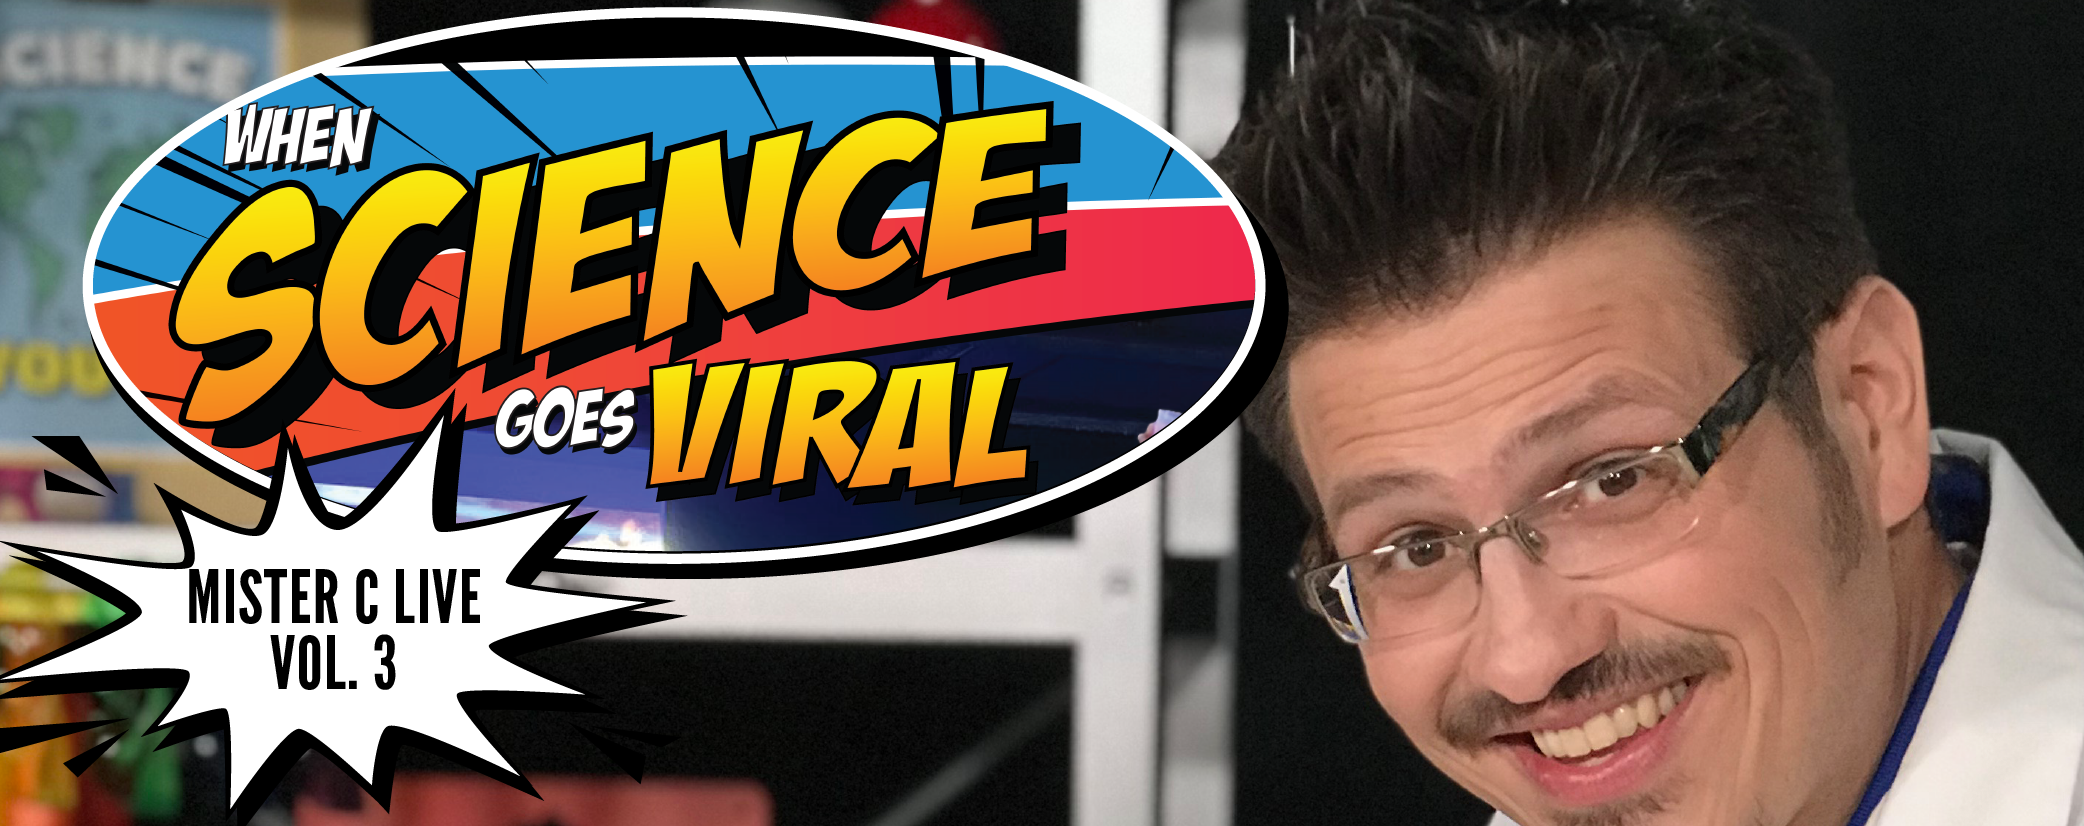 Mister C LIVE, When Science Goes Viral